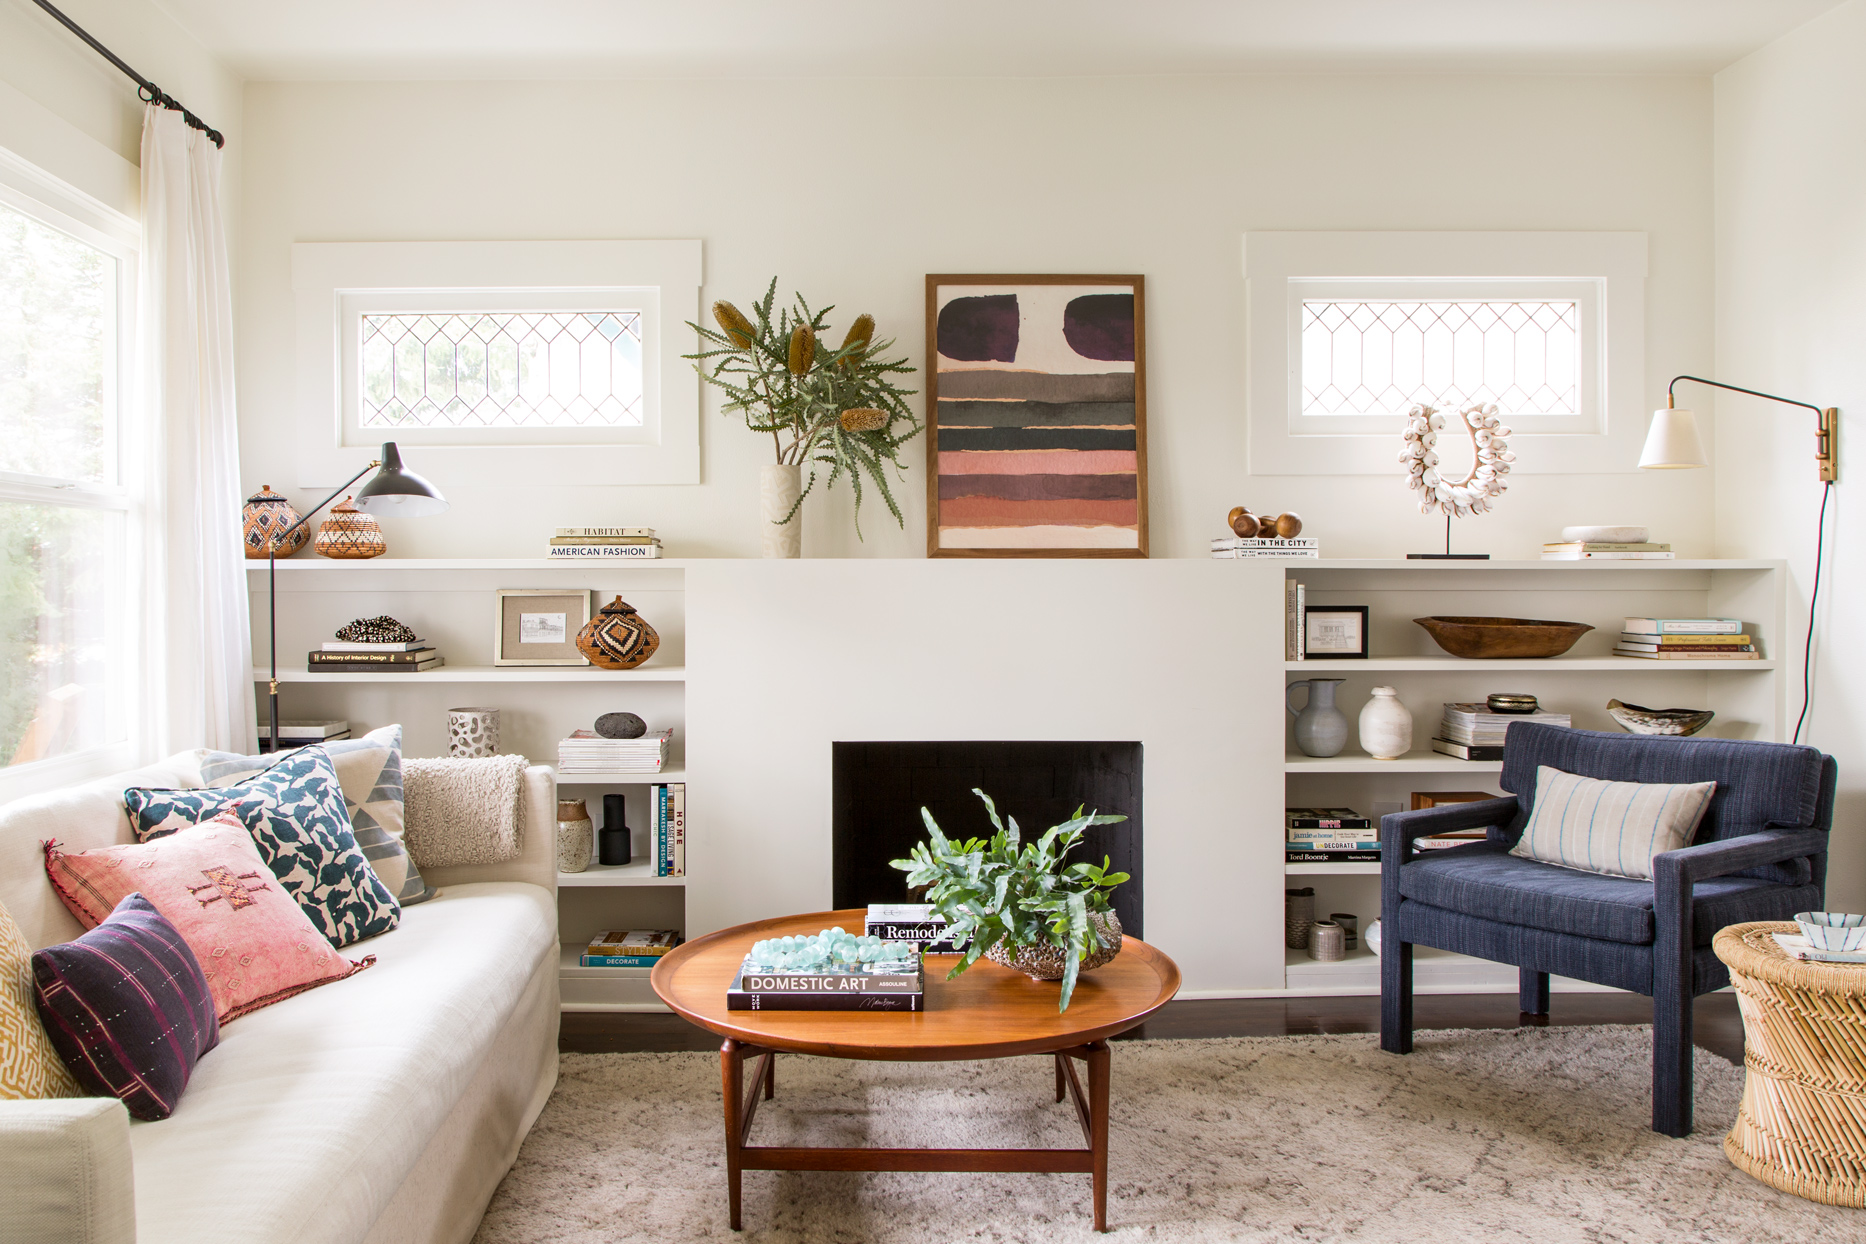 Decorating the living room: prepare a preliminary budget for the project